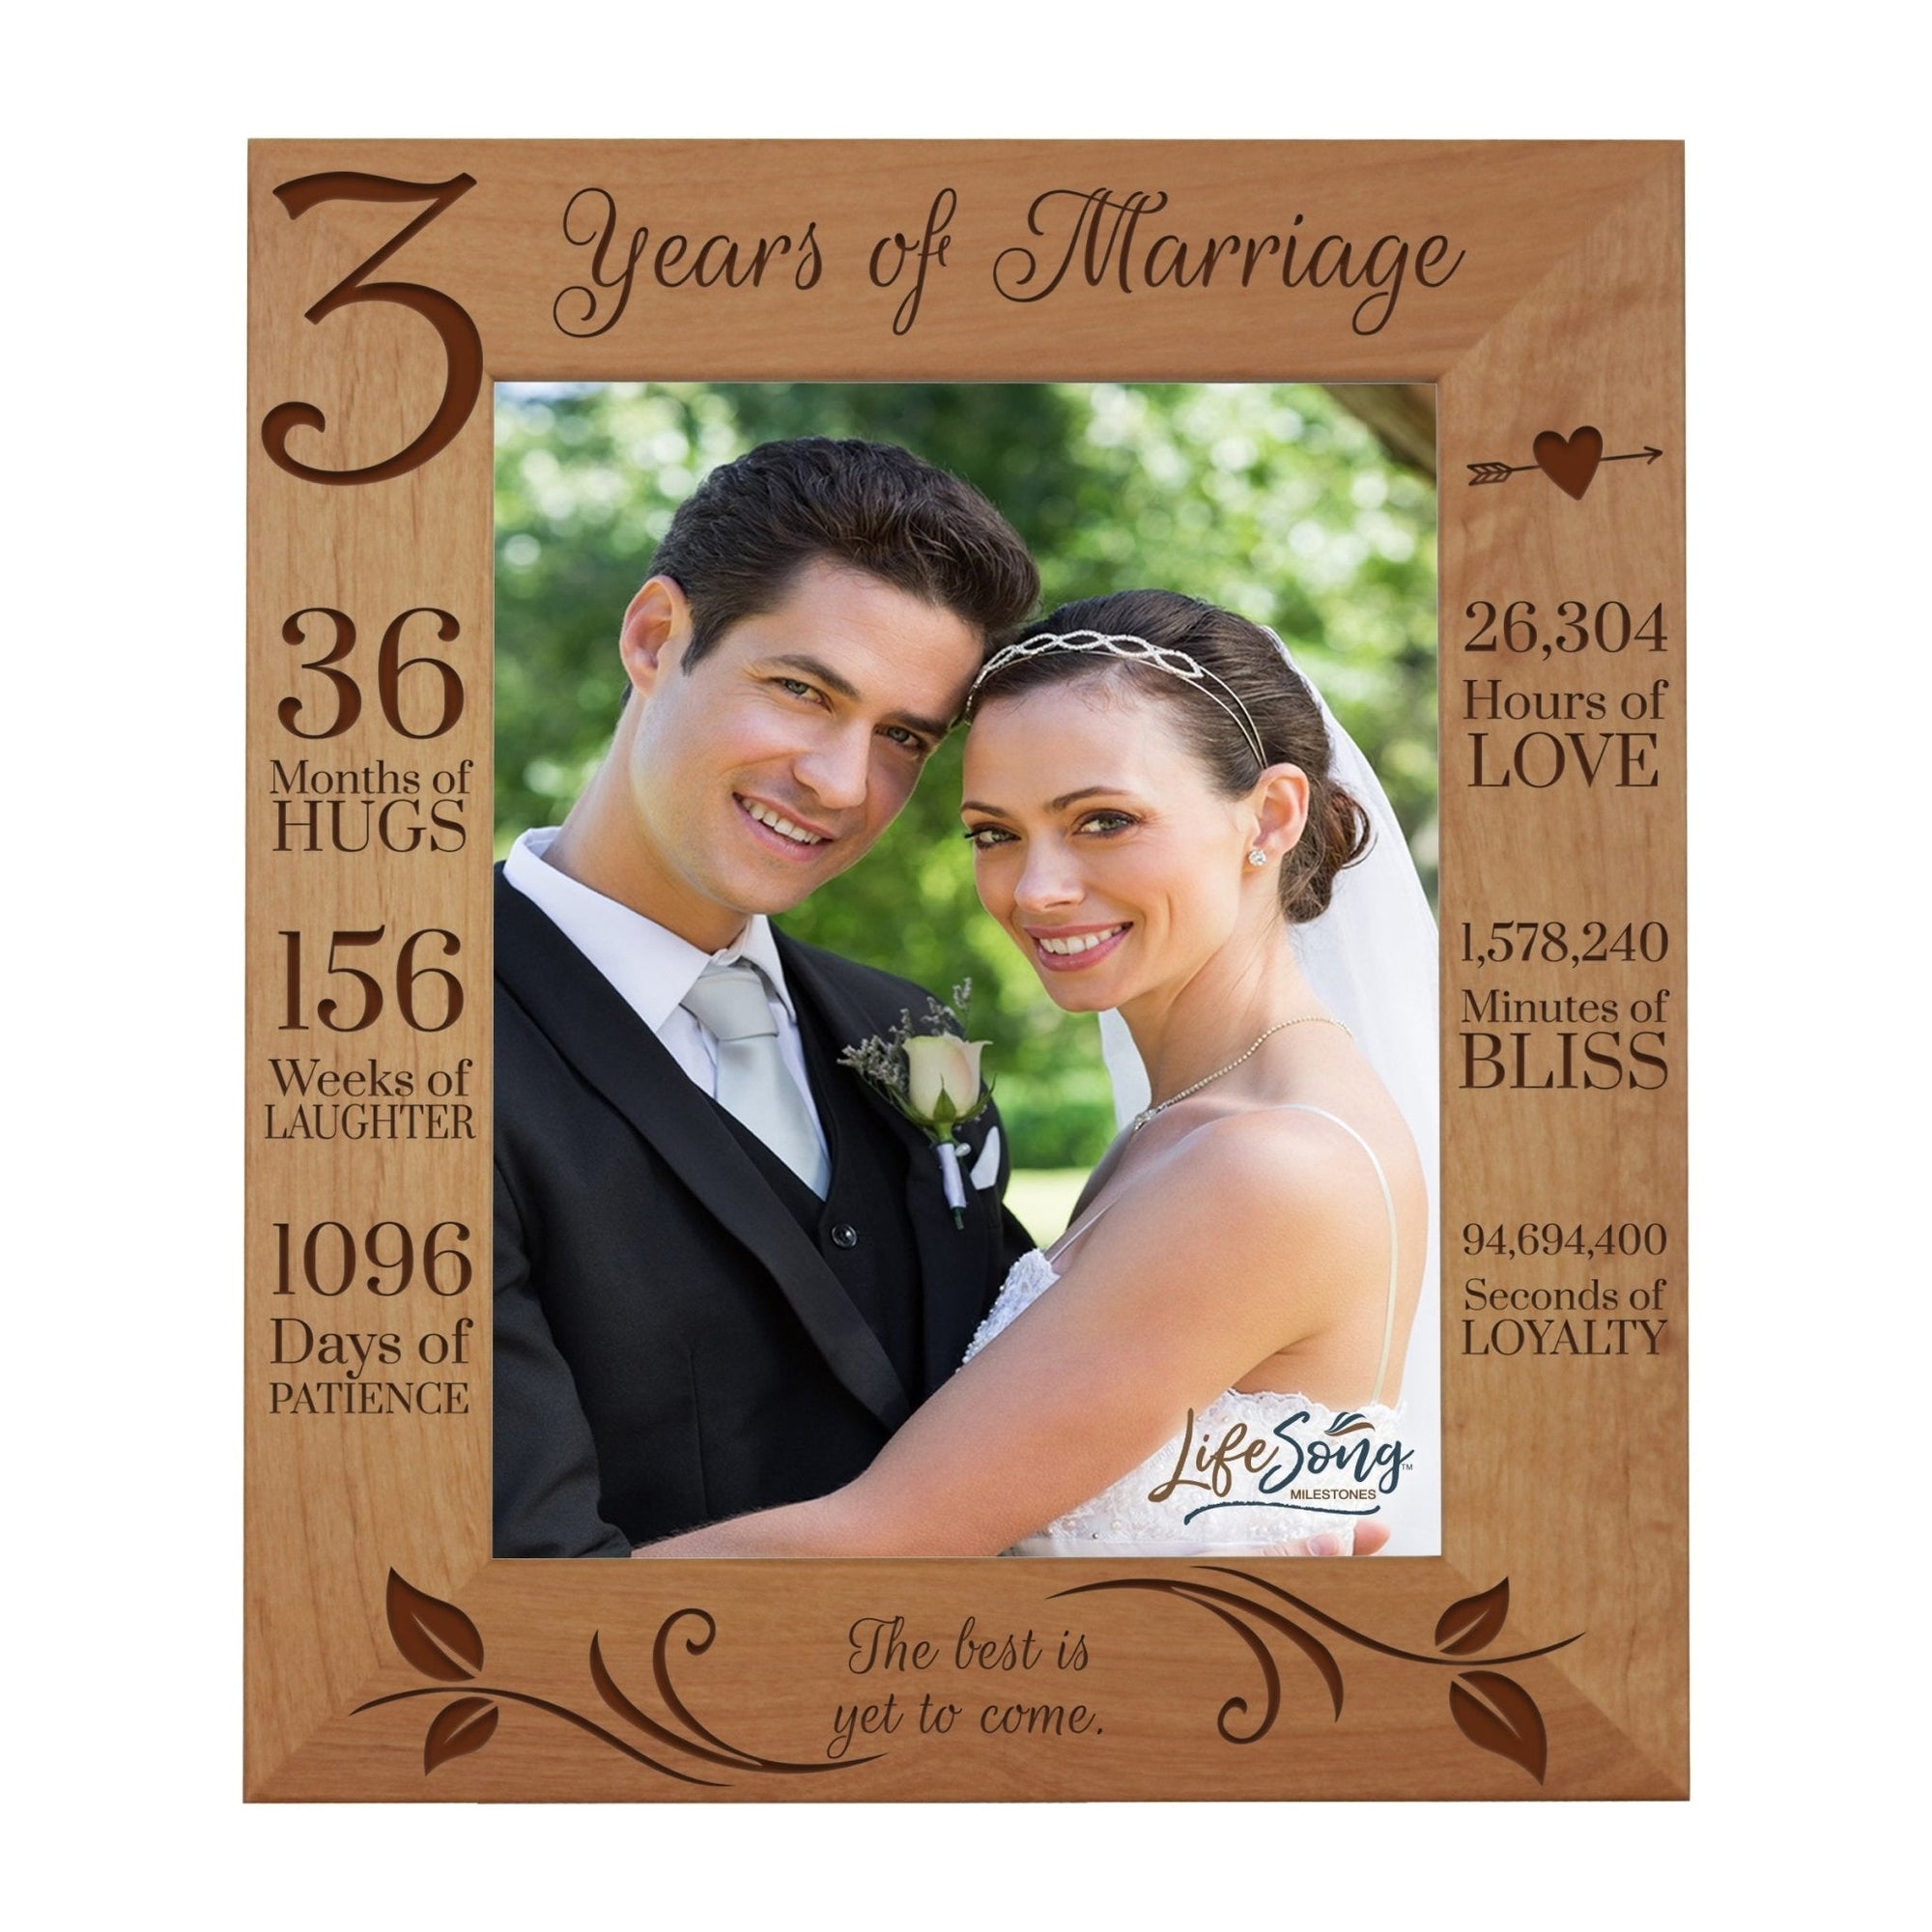 Couples 3rd Wedding Anniversary Photo Frame Home Decor Gift Ideas - The Best Is Yet To Come - LifeSong Milestones